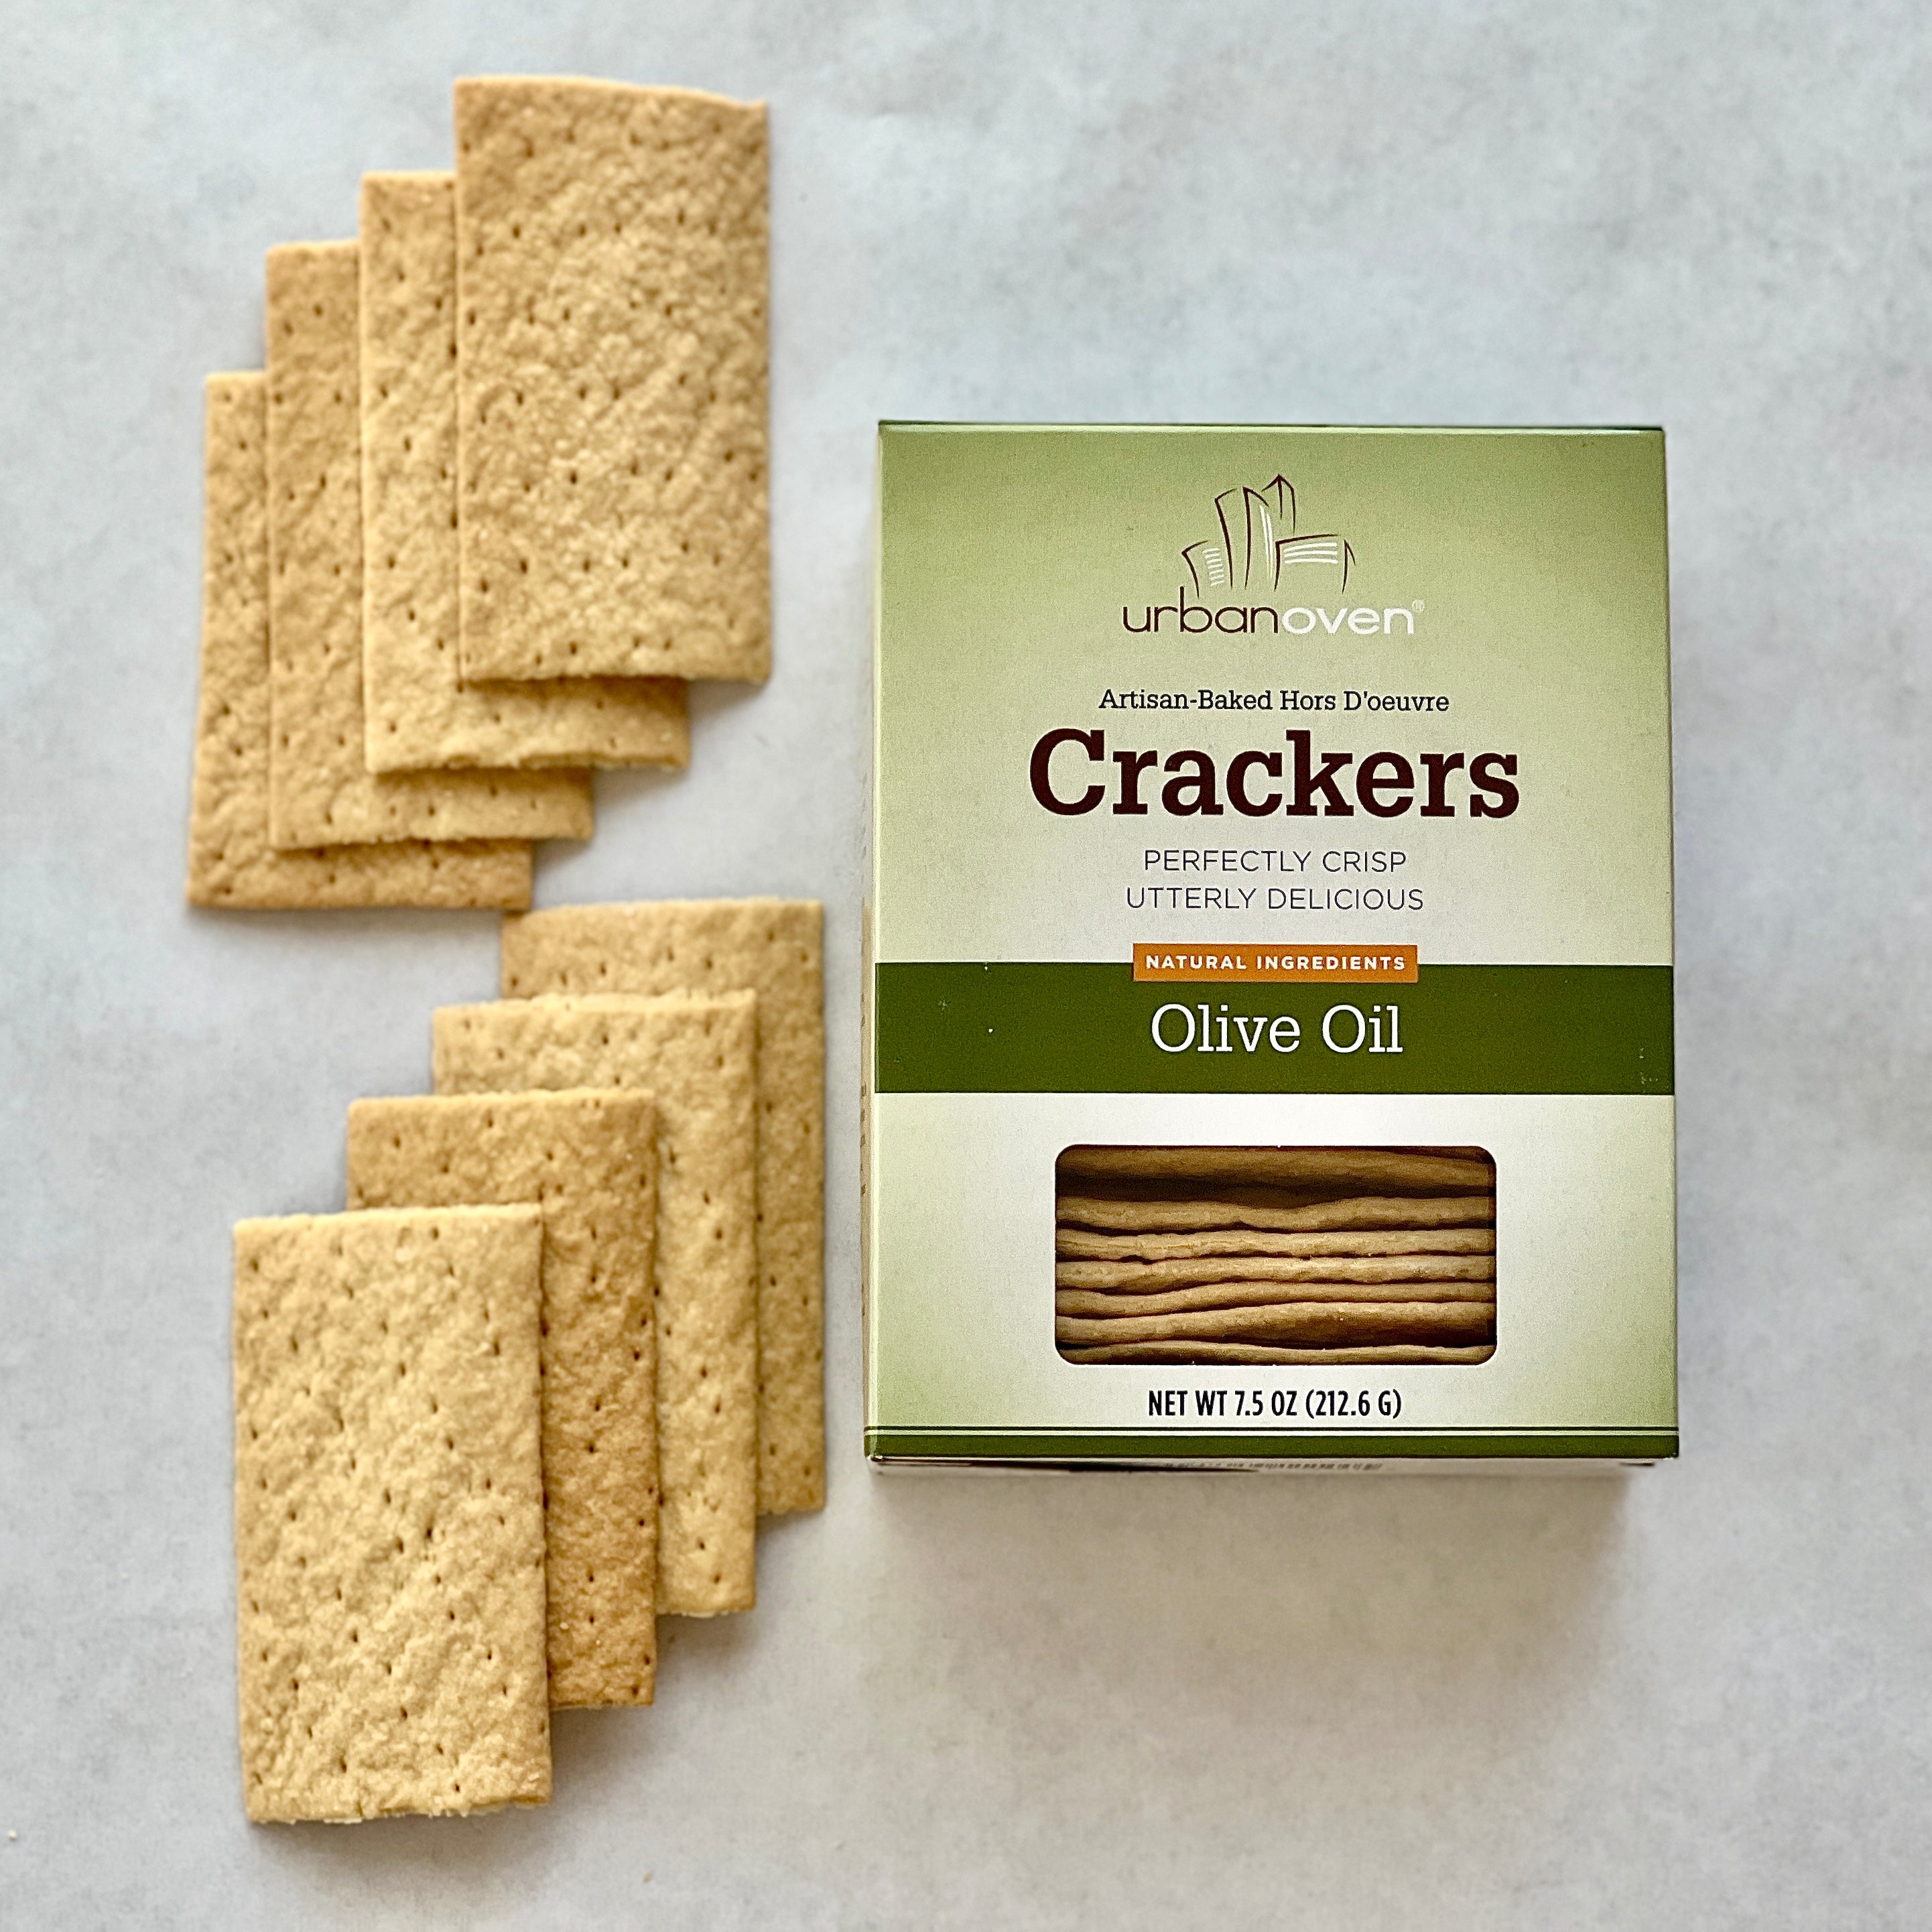 crackers in and out of box